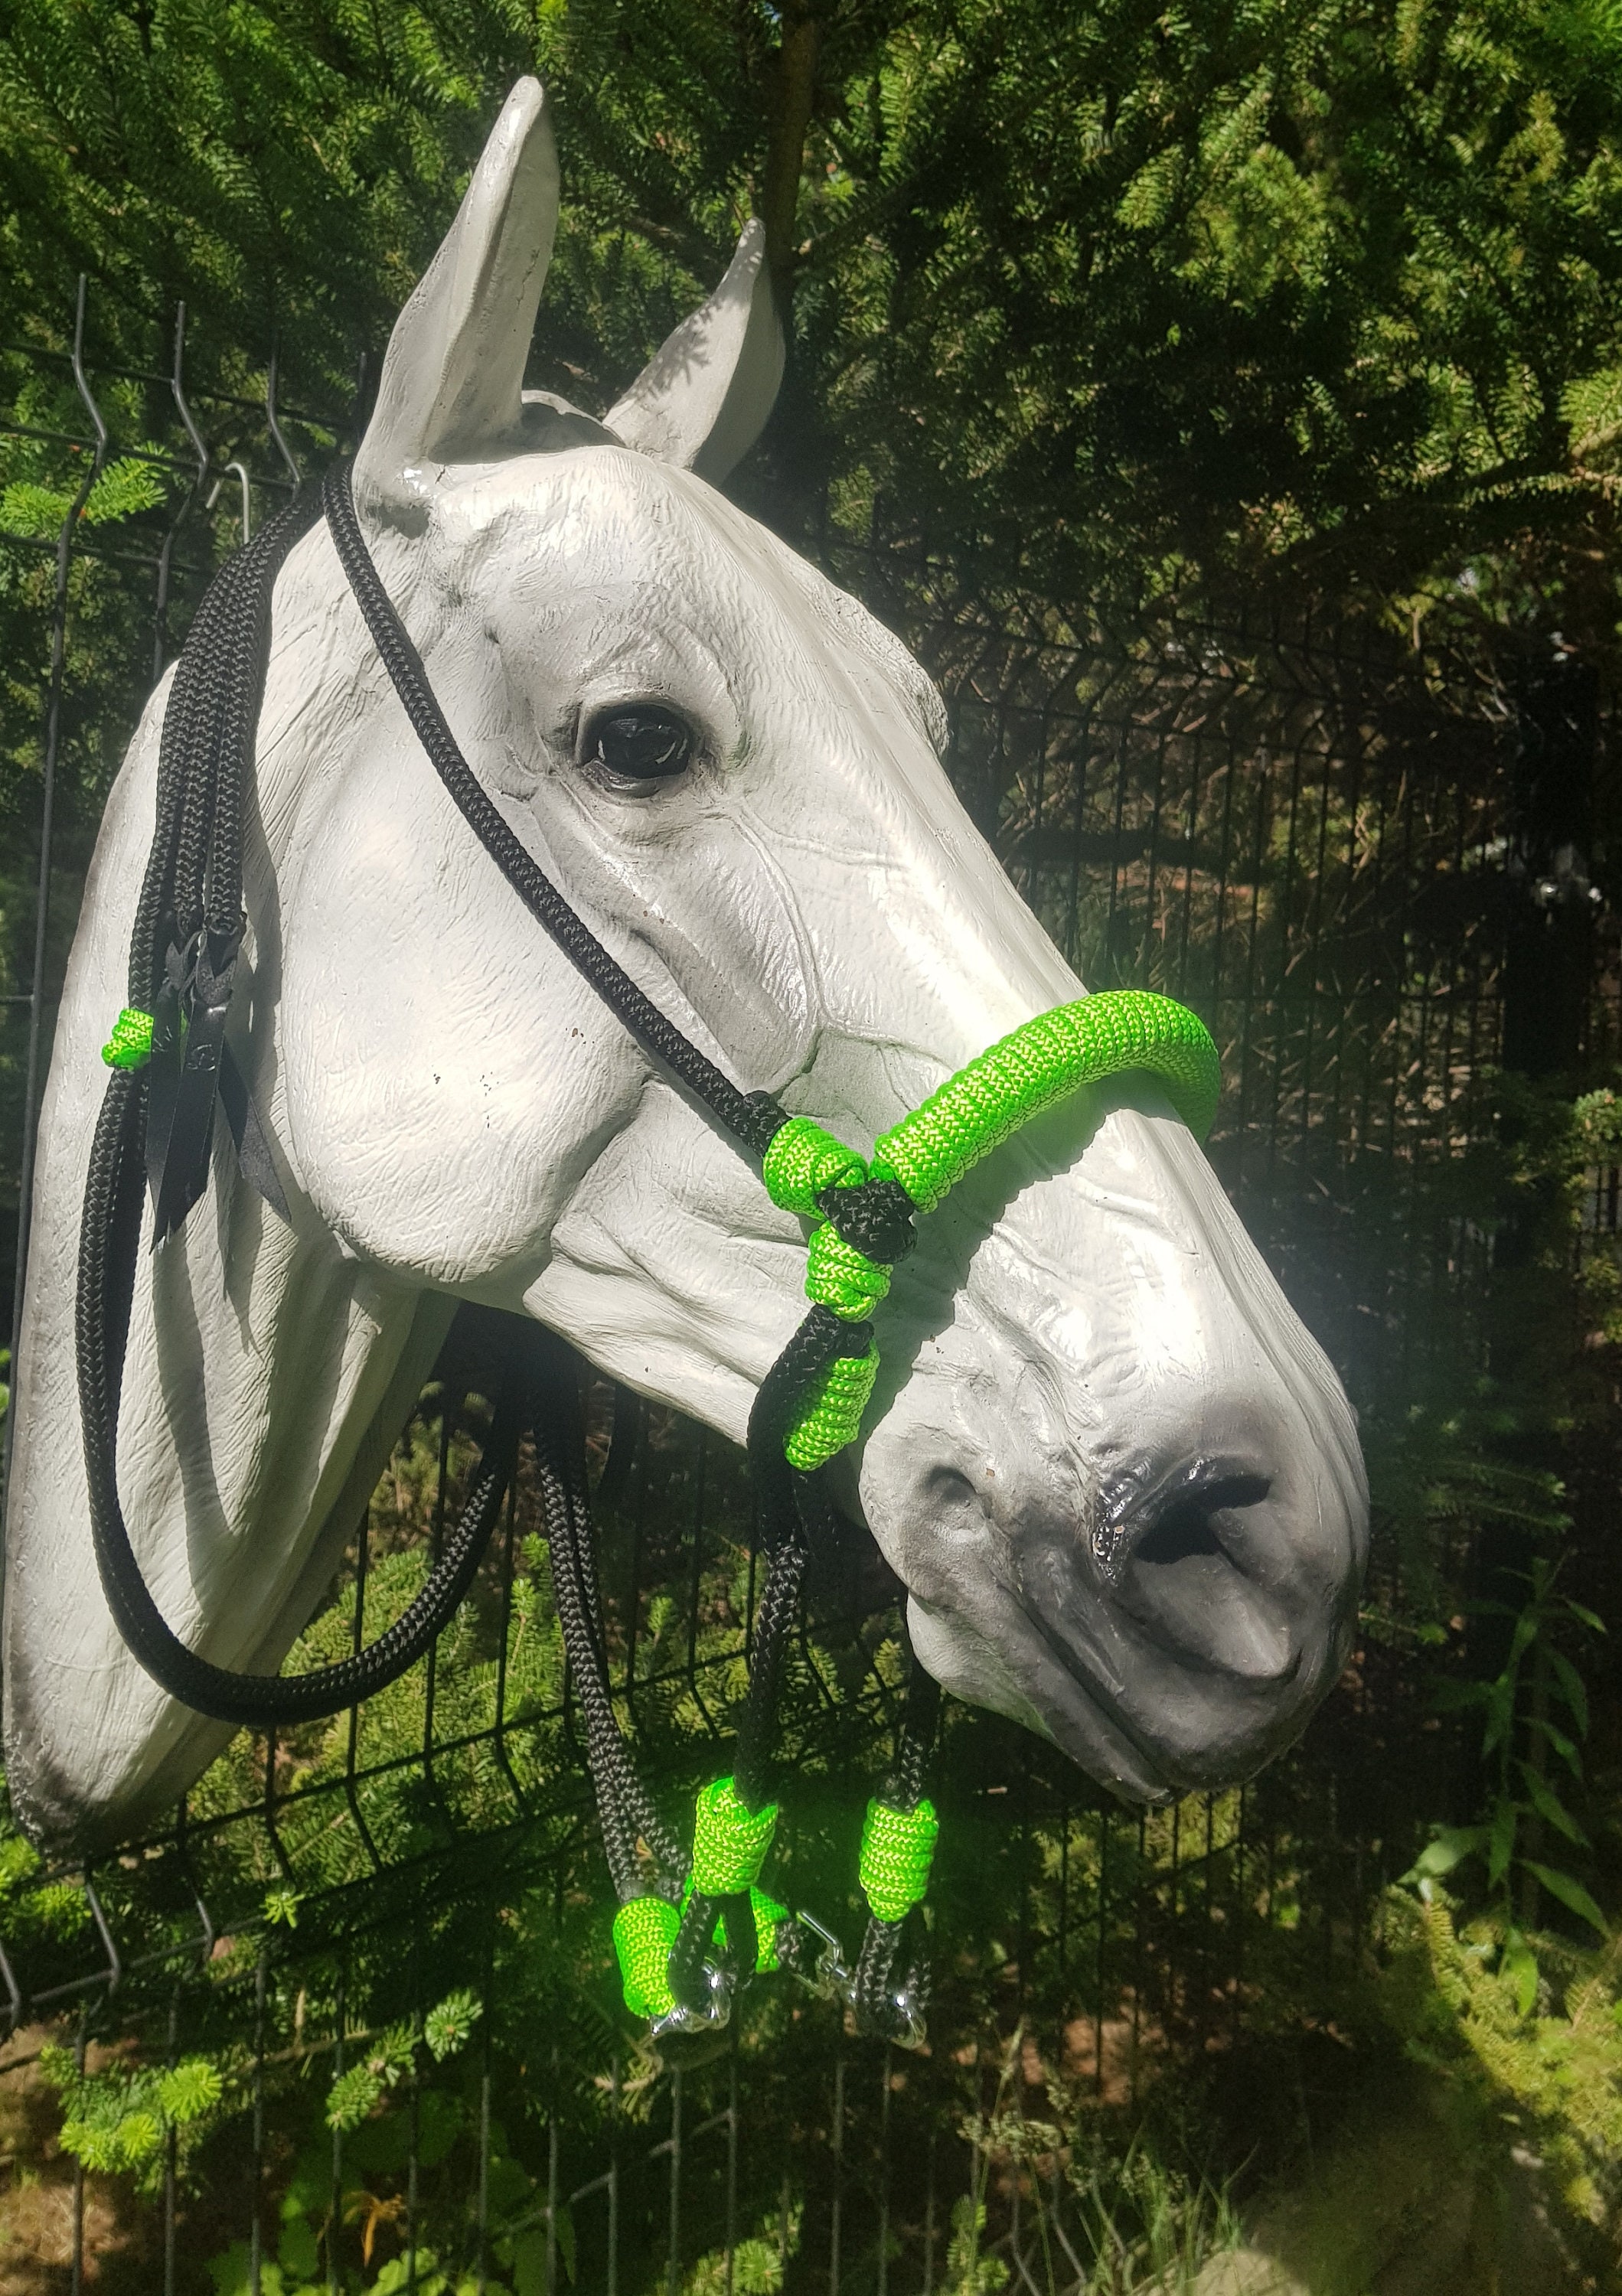 Bitless Indian Bosal Rope Bridle - The Homestead Tack Shop